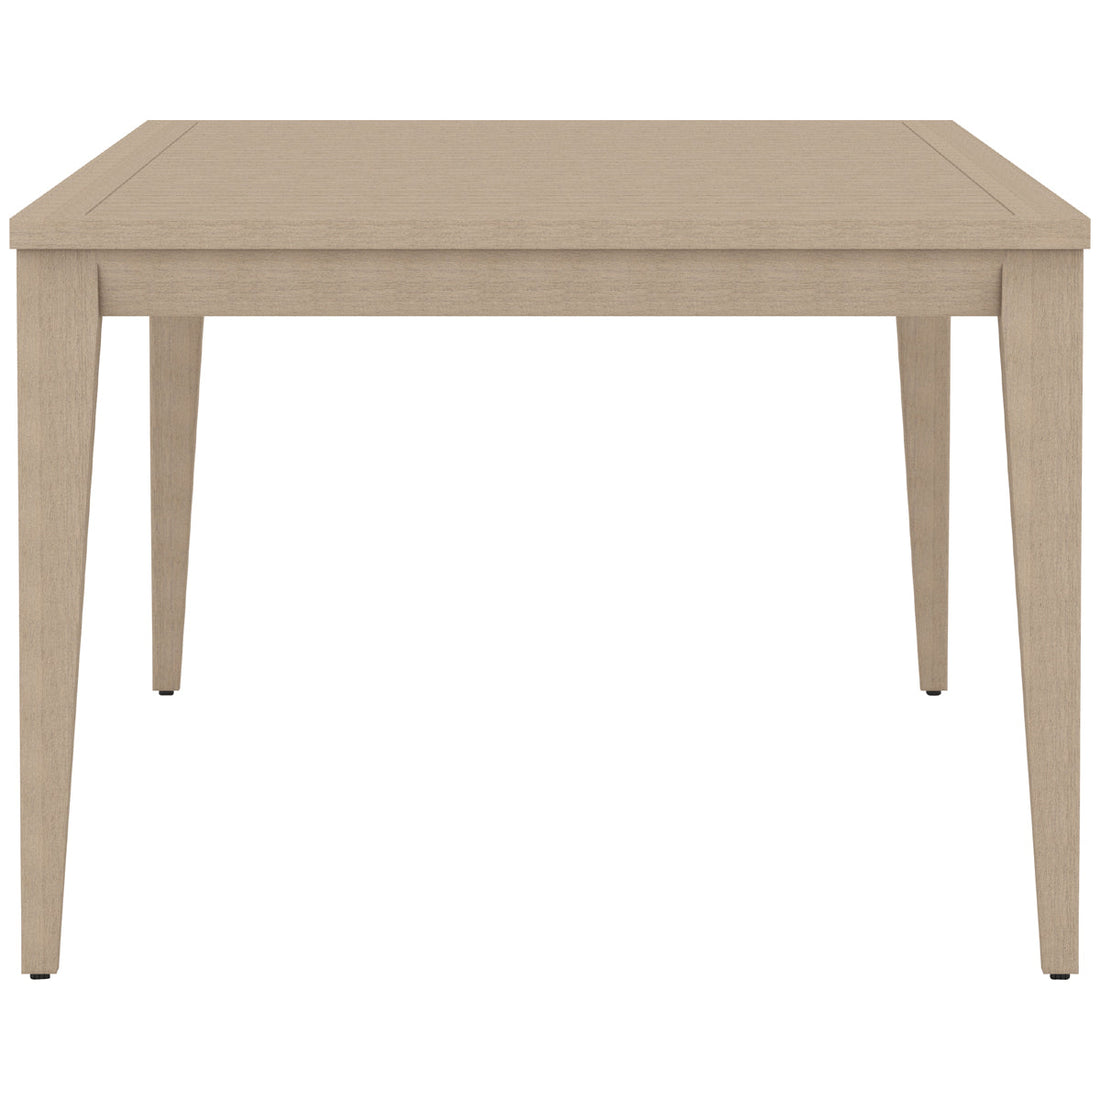 Four Hands Solano Sherwood 94-Inch Outdoor Dining Table